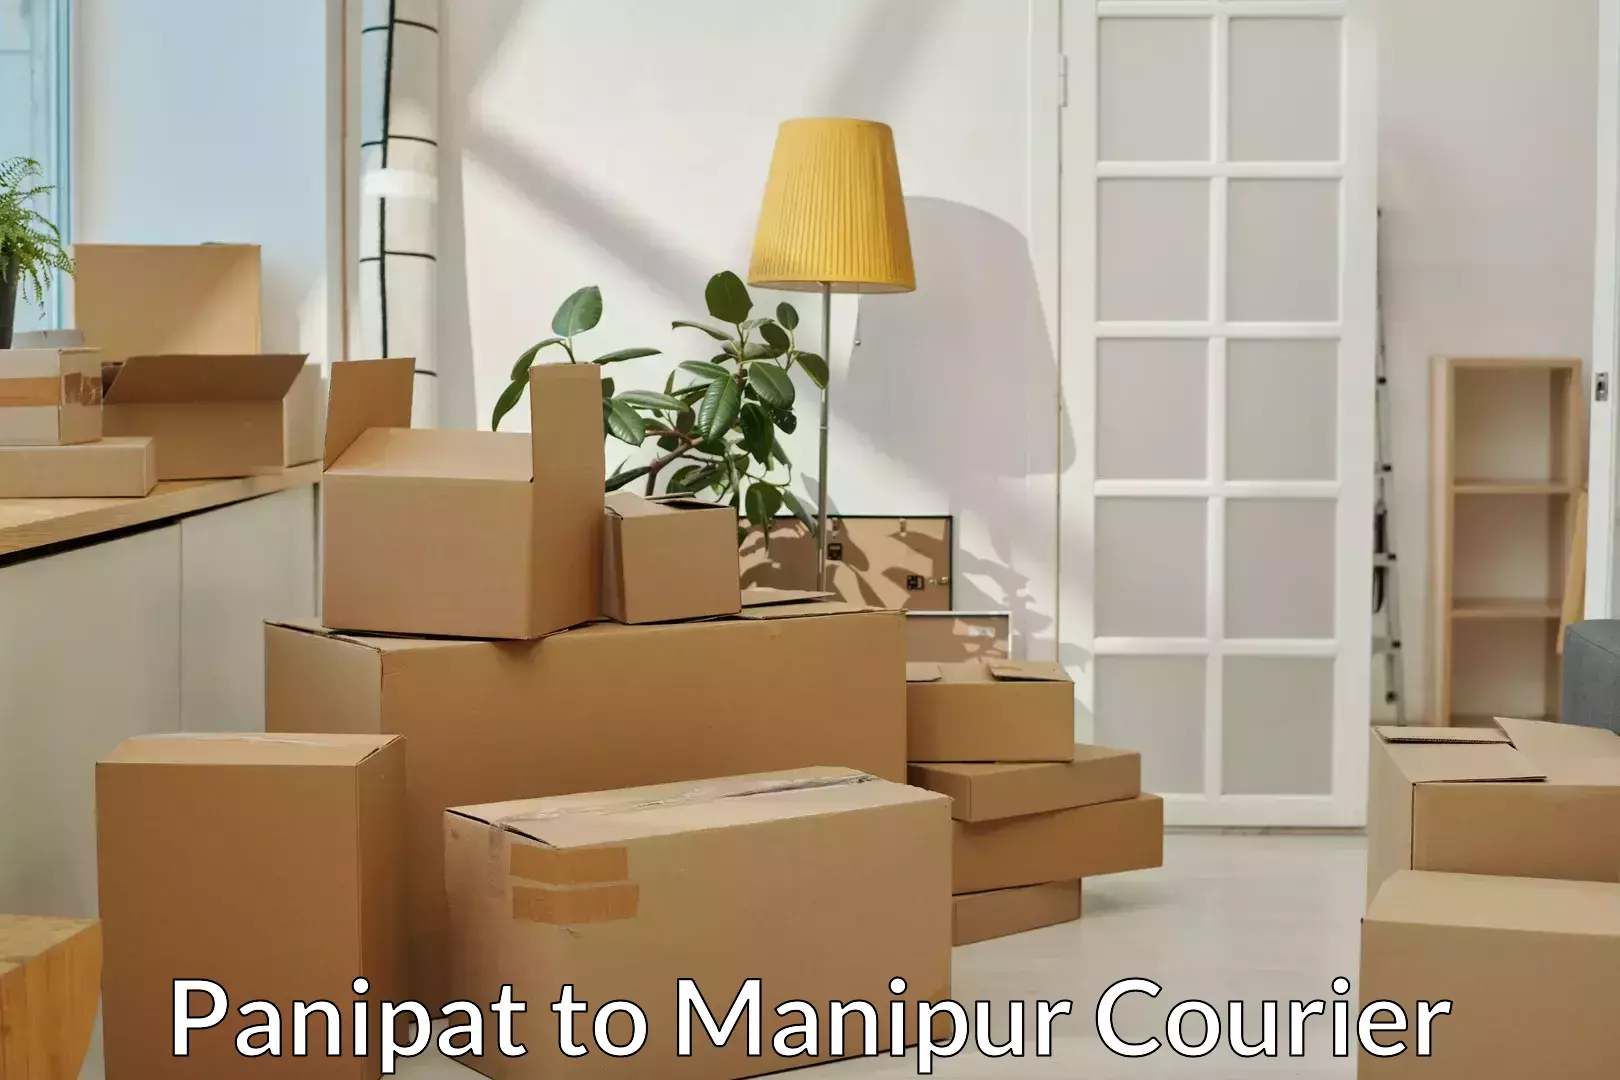 Furniture delivery service Panipat to Chandel